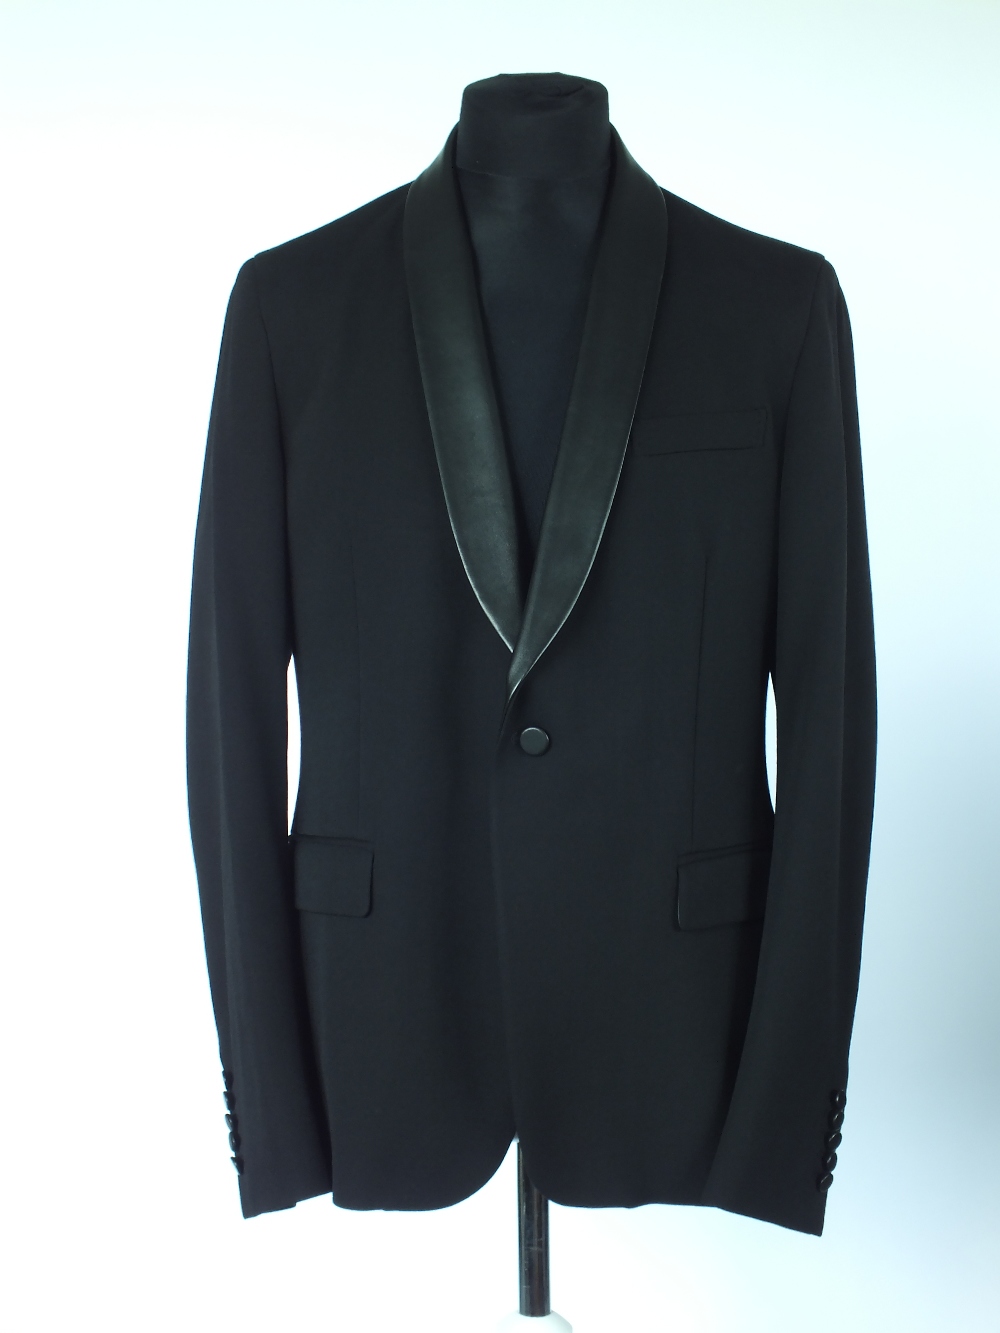 A Gucci dinner jacket, black, leather shawl collar, double vent, lined, Italian size 52R, 98%